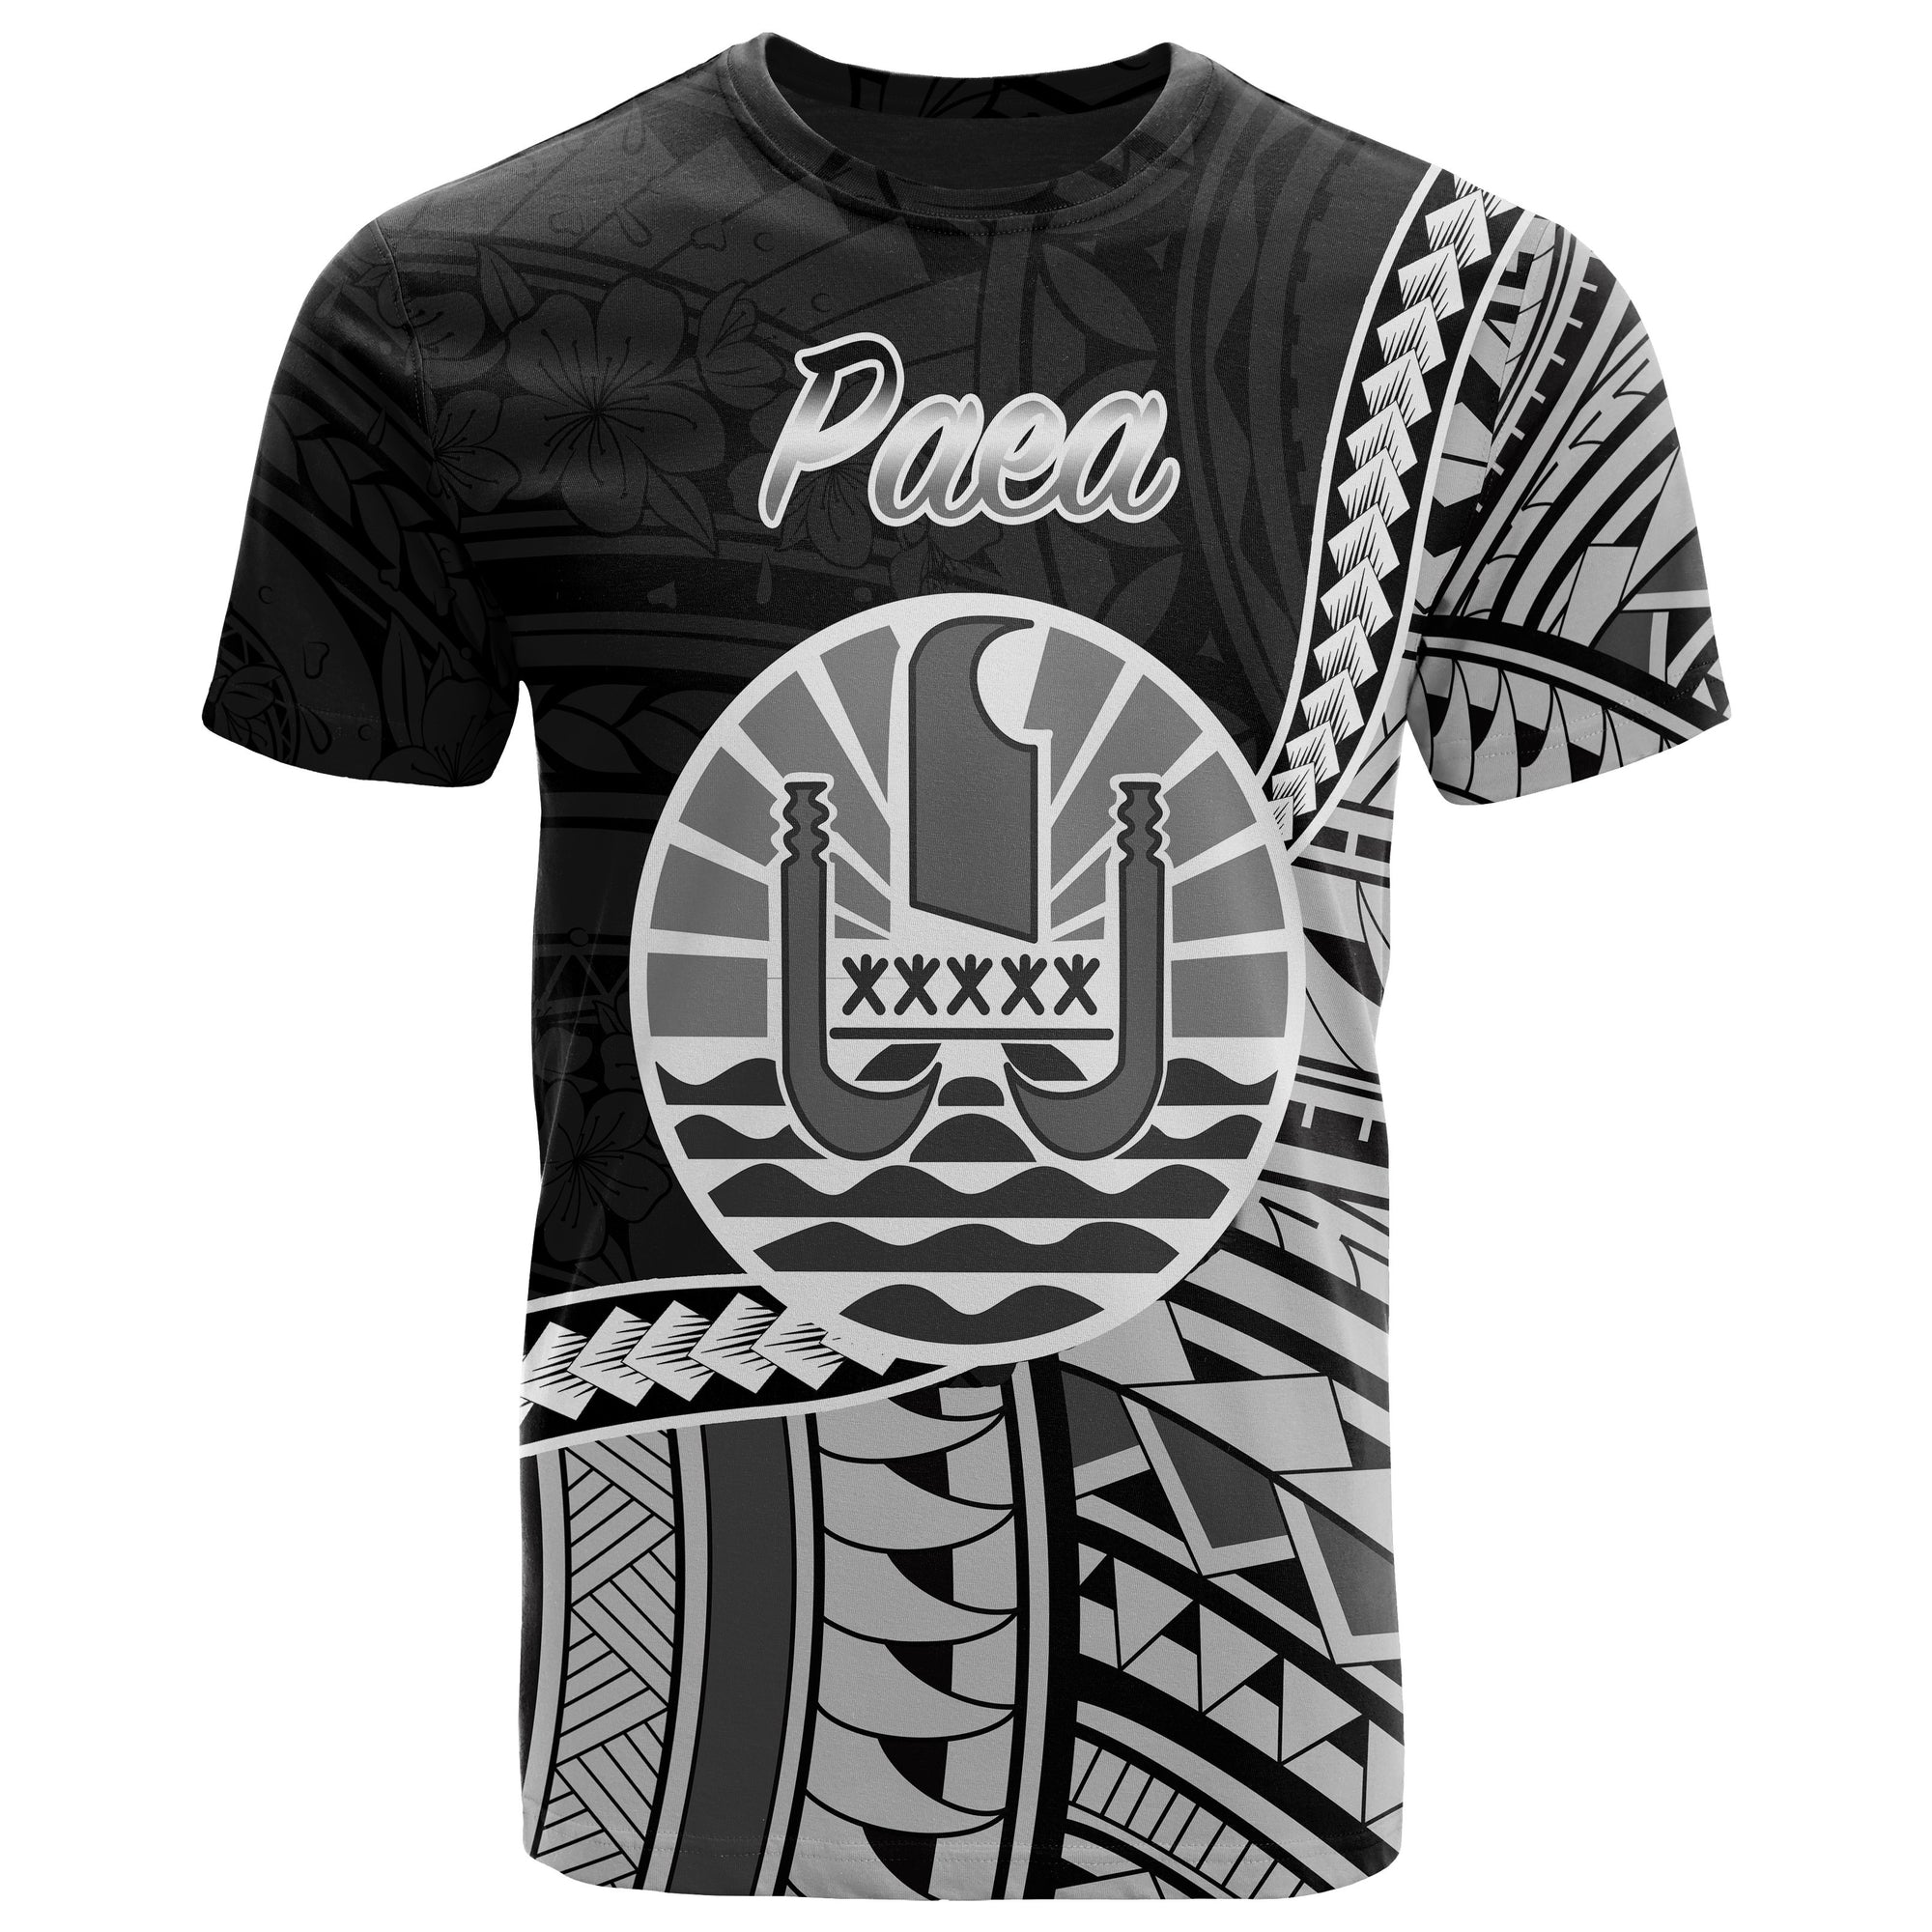 French Polynesia T Shirt Paea Seal of French Polynesia Polynesian Patterns Unisex Black - Polynesian Pride